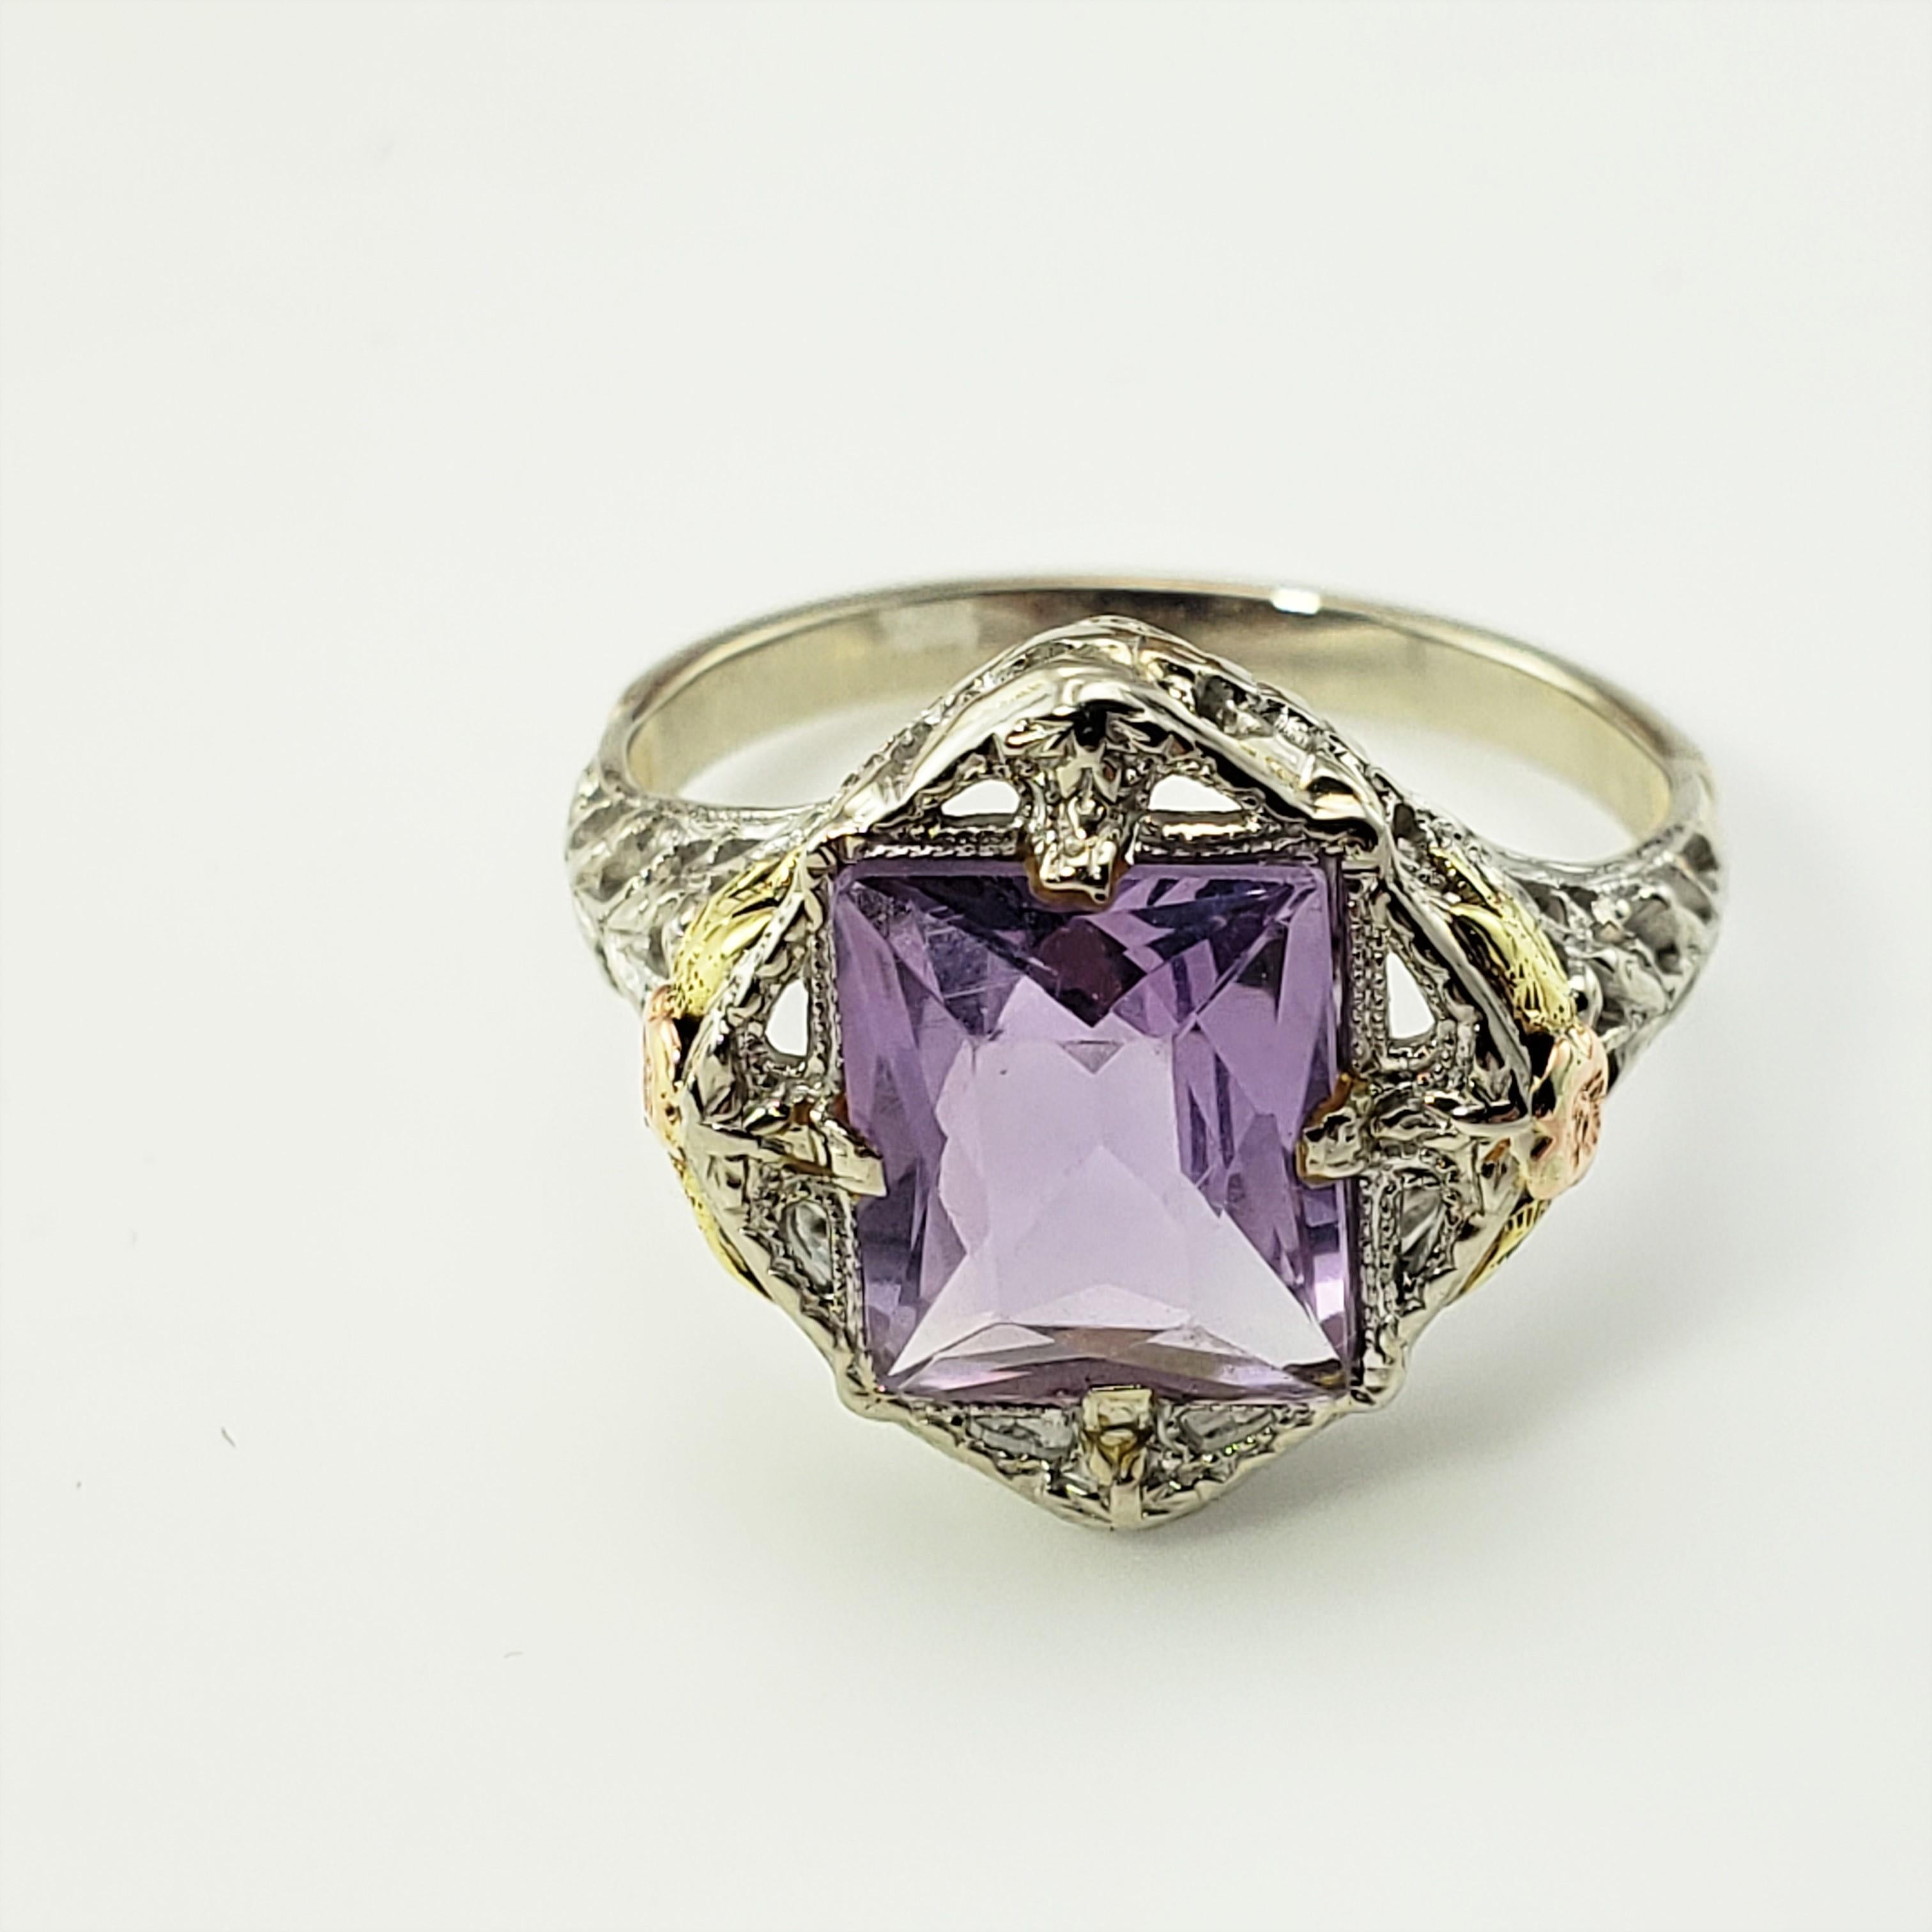 Vintage 10 Karat White, Rose and Yellow Gold Amethyst Ring Size 4.25 GAI Certified-

This lovely ring features one rectangular amethyst stone (7 mm x 7 mm) set in beautifully detailed 10K white gold. Accented with yellow and rose gold flowers.